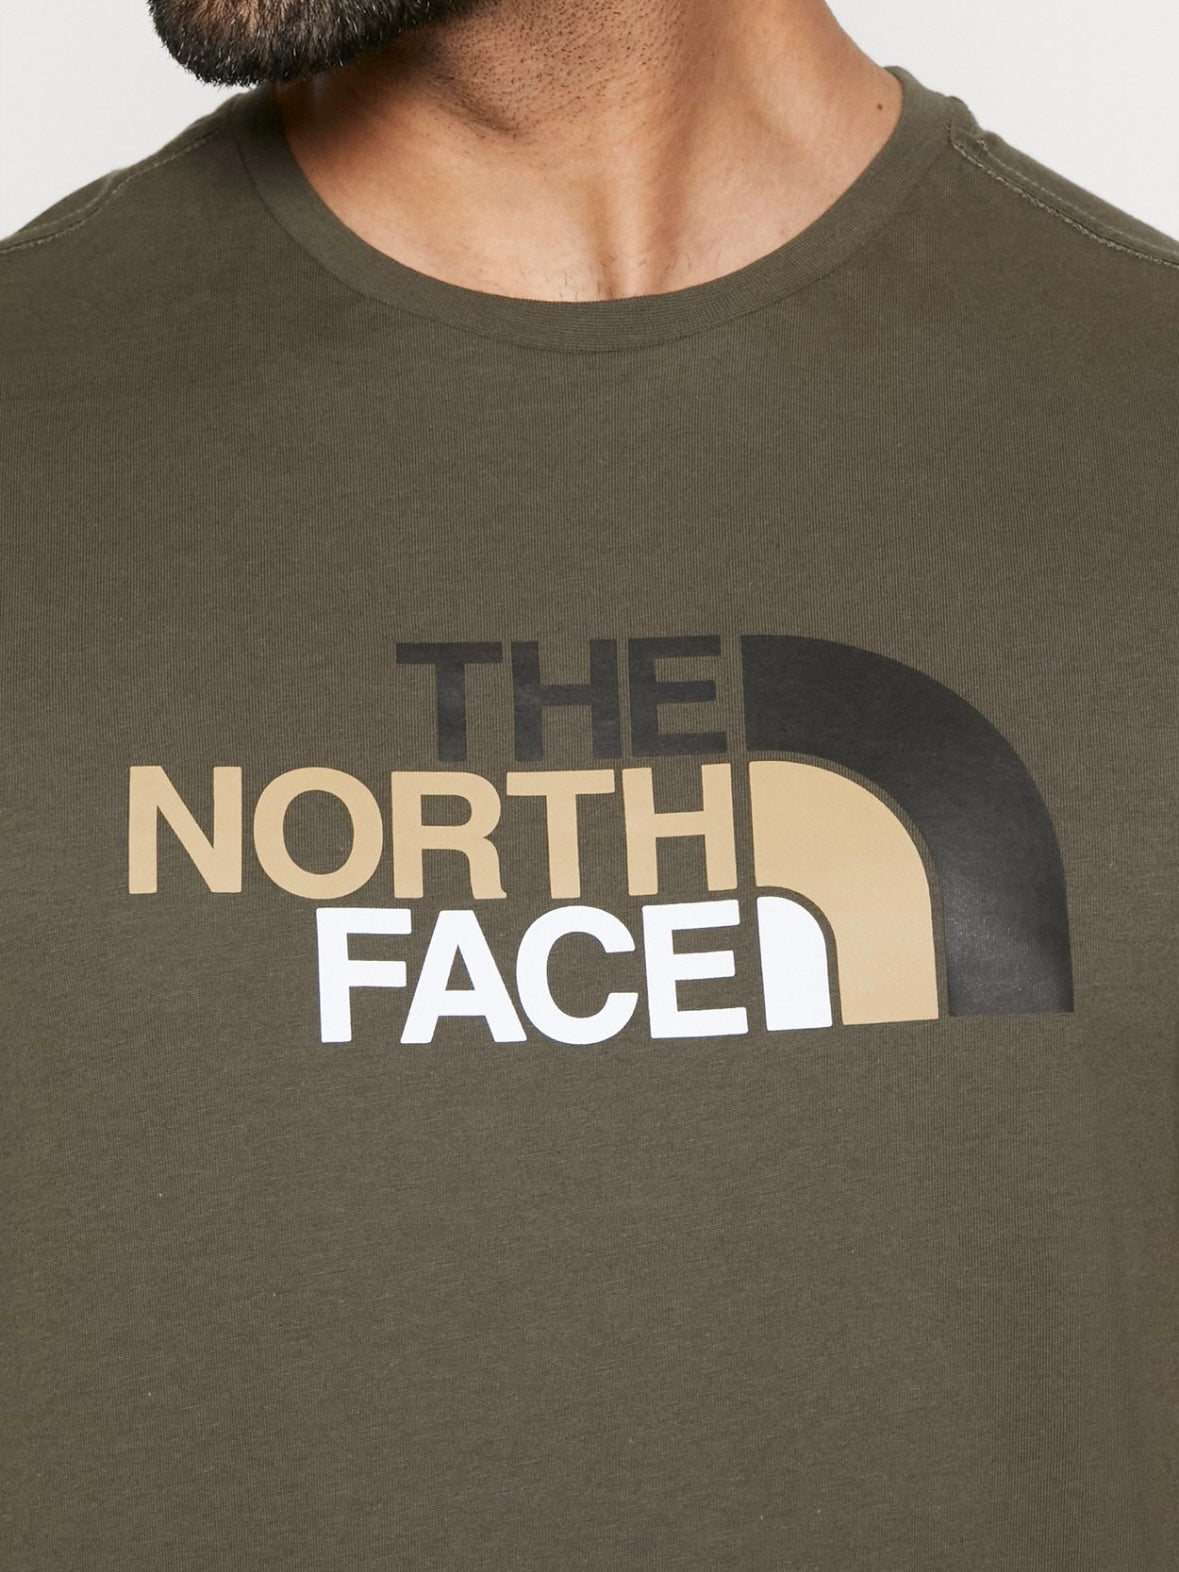 THE NORTH FACE - T-Shirt